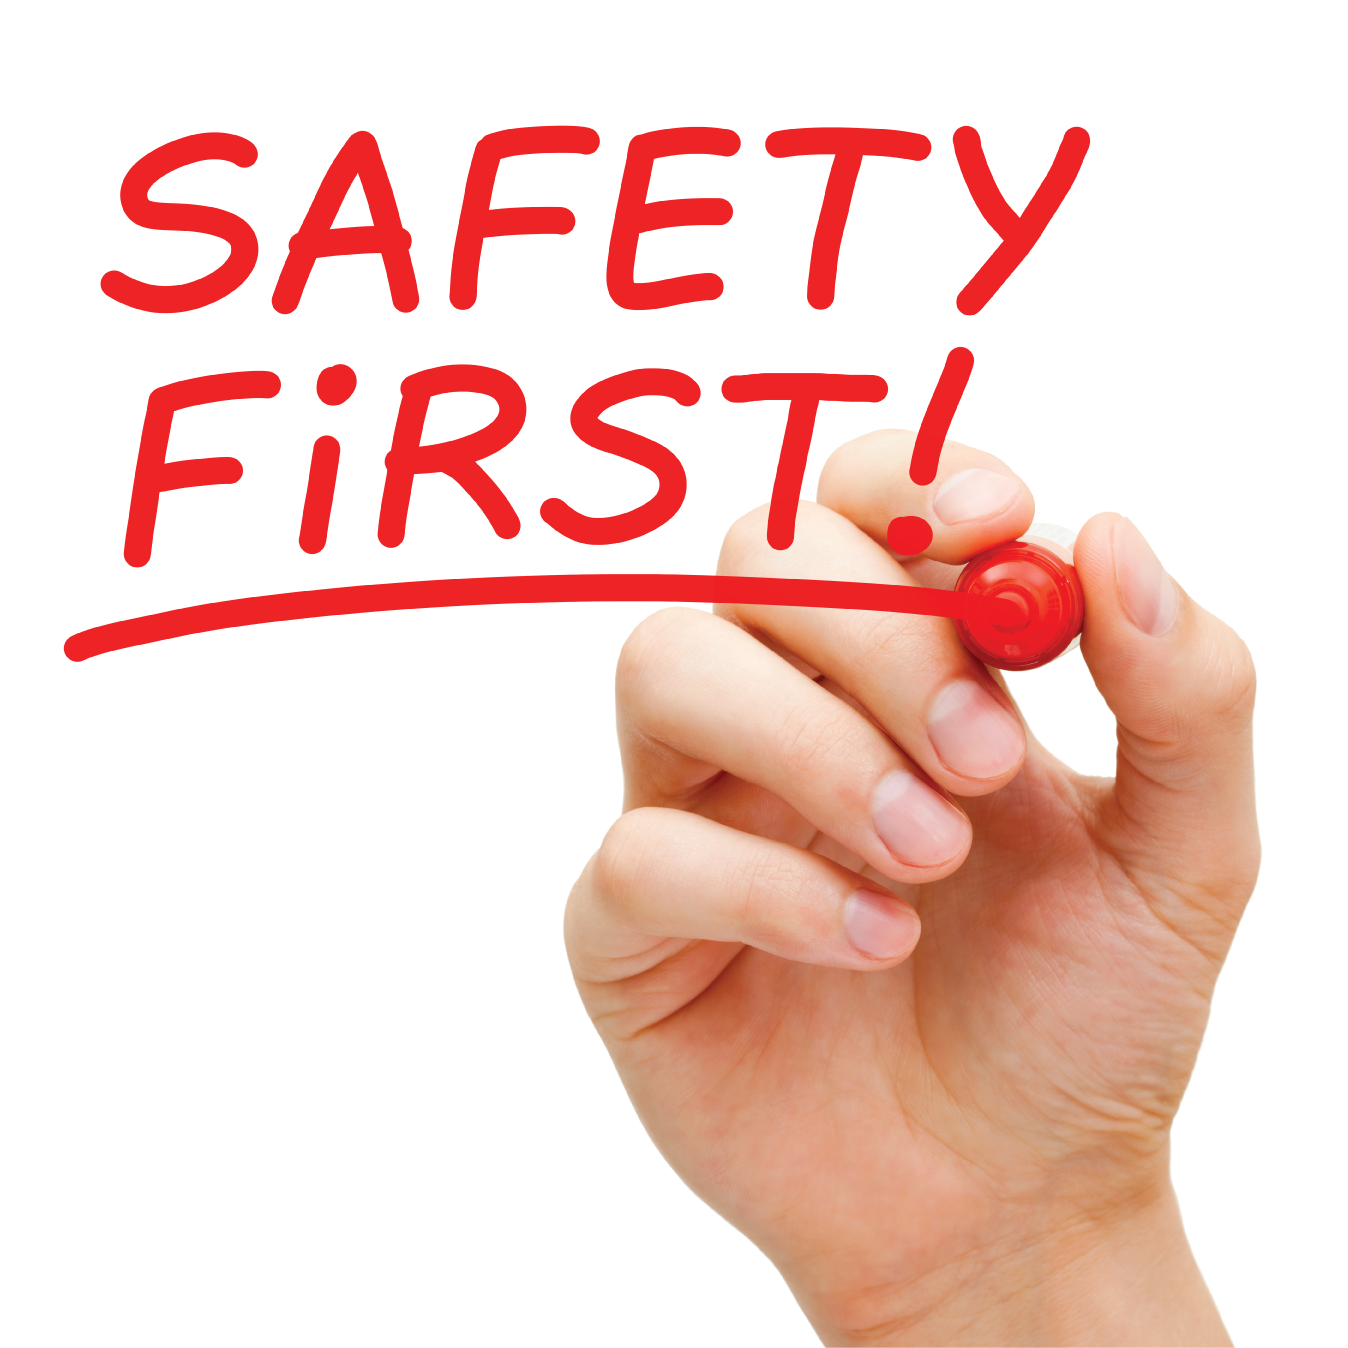 Download Free High Quality Safety First Image PNG Transparent Background, Free Download